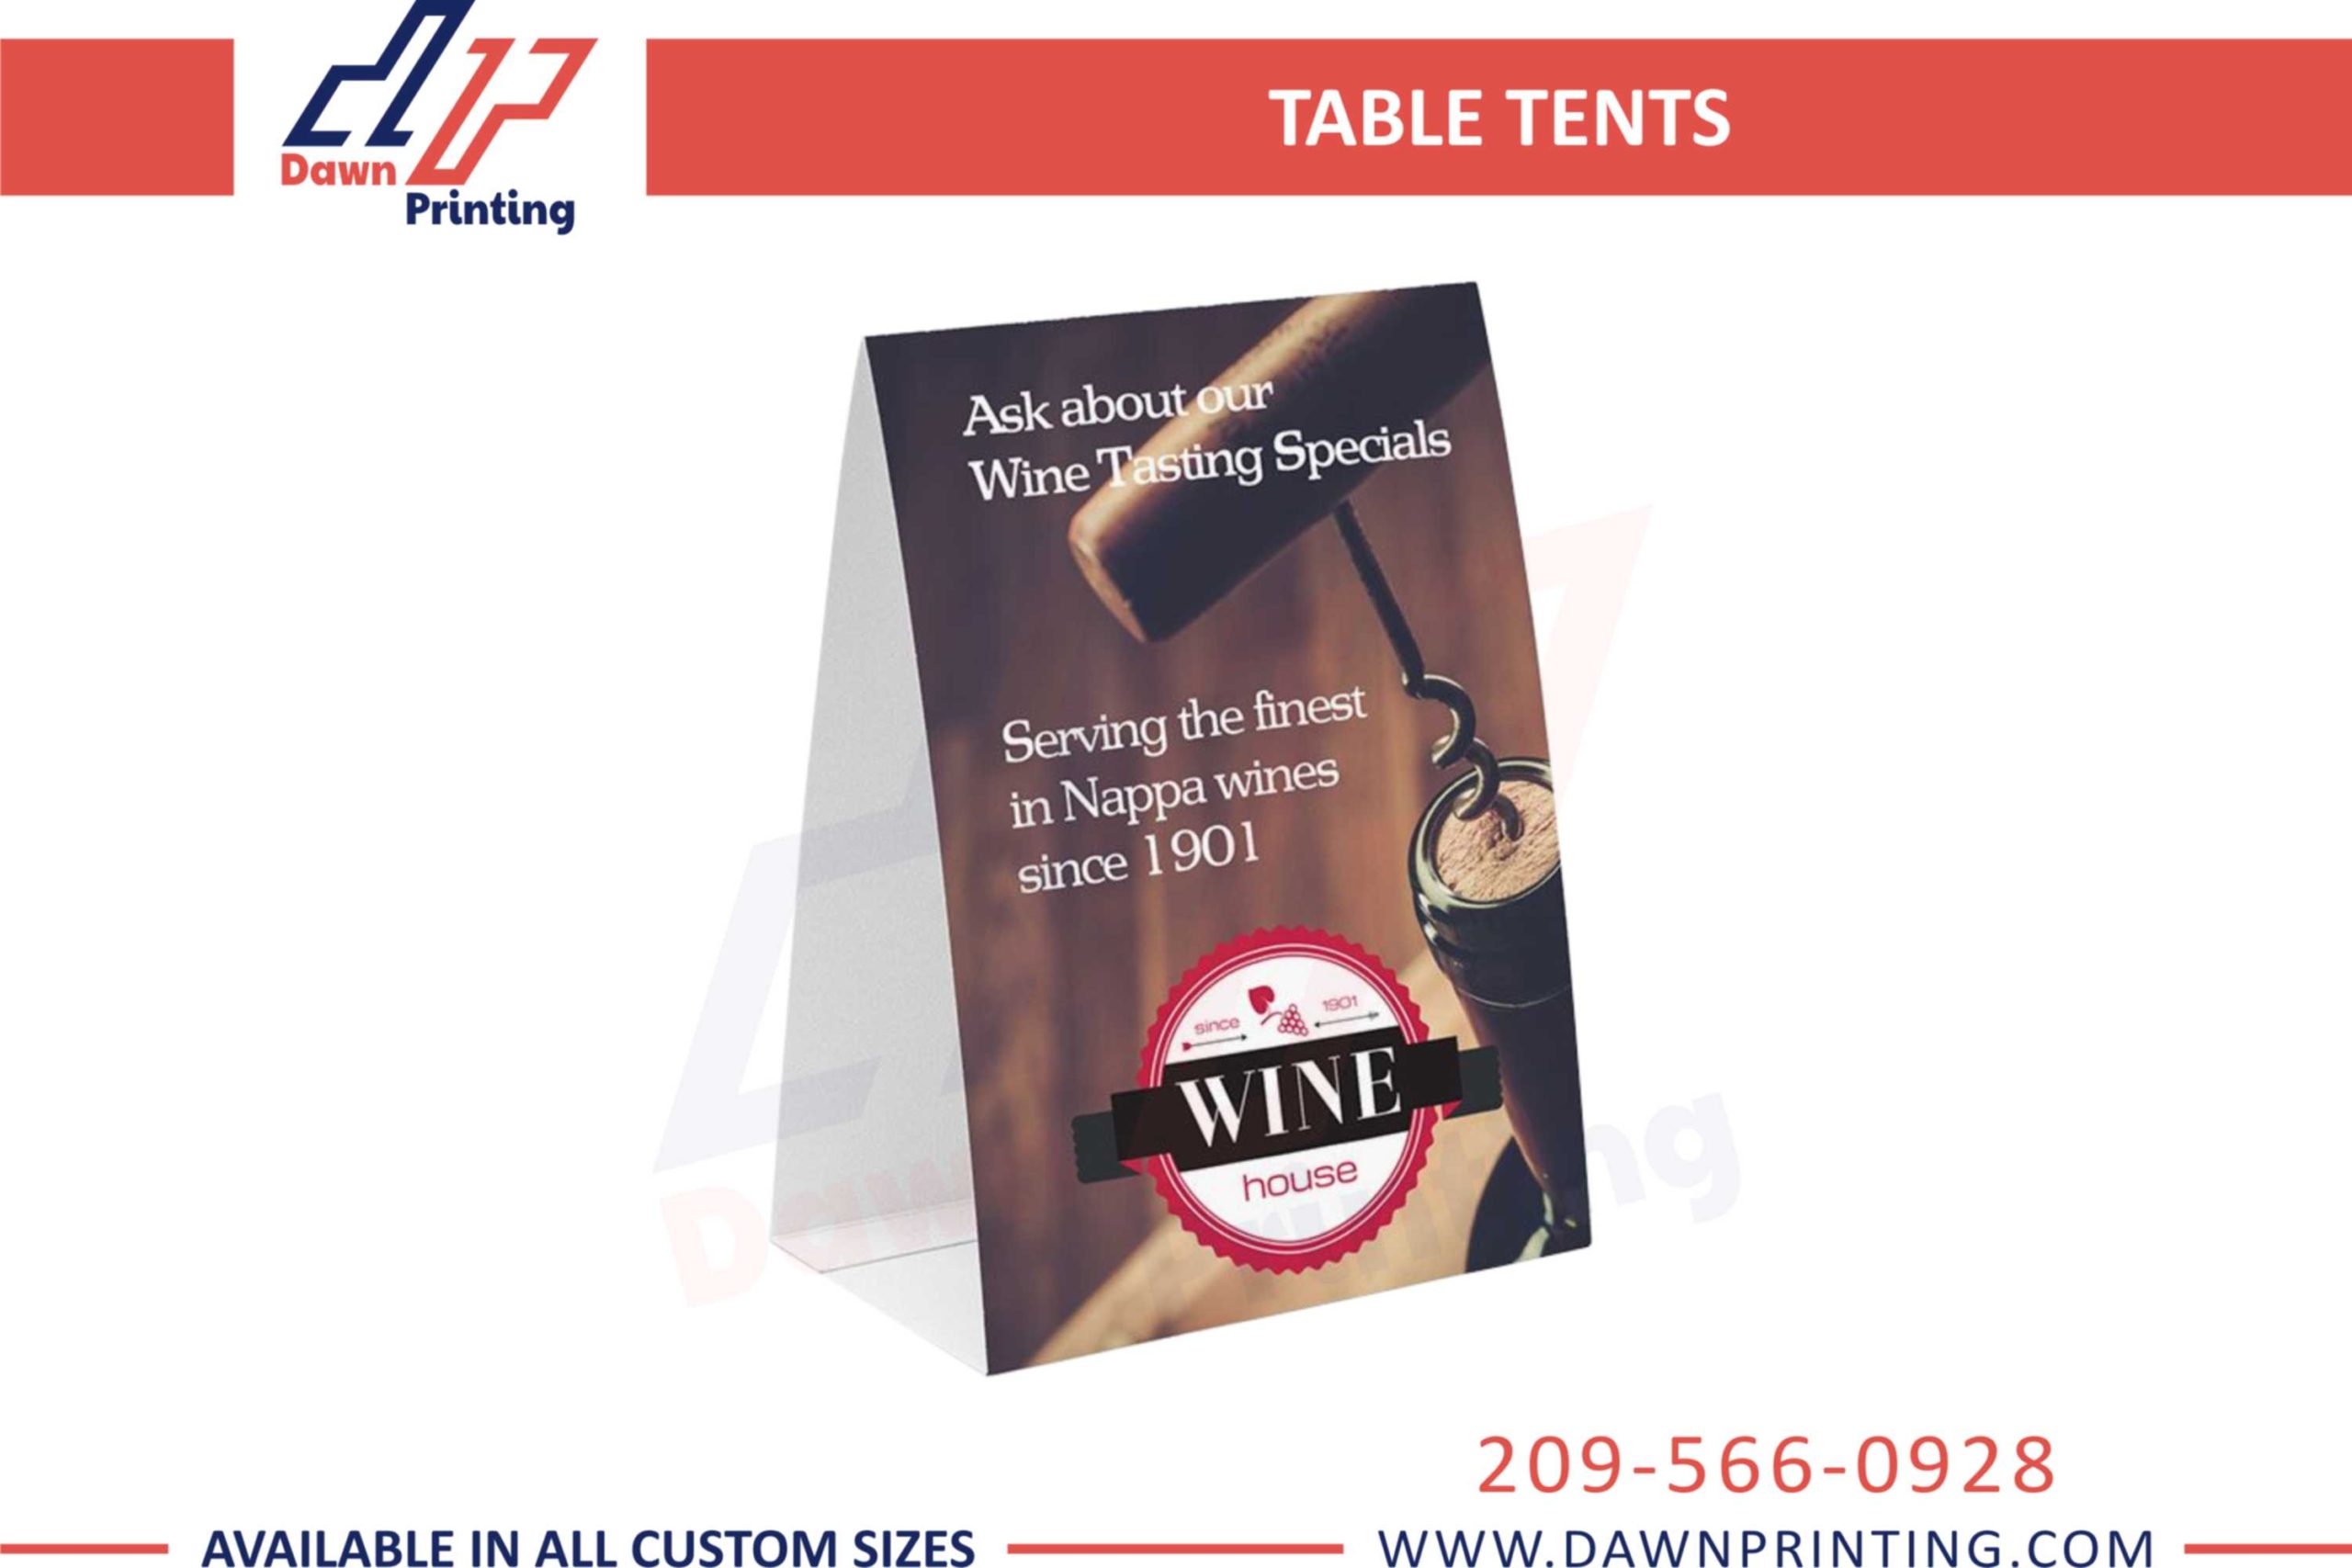 Festival Table Tents - Dawn Printing